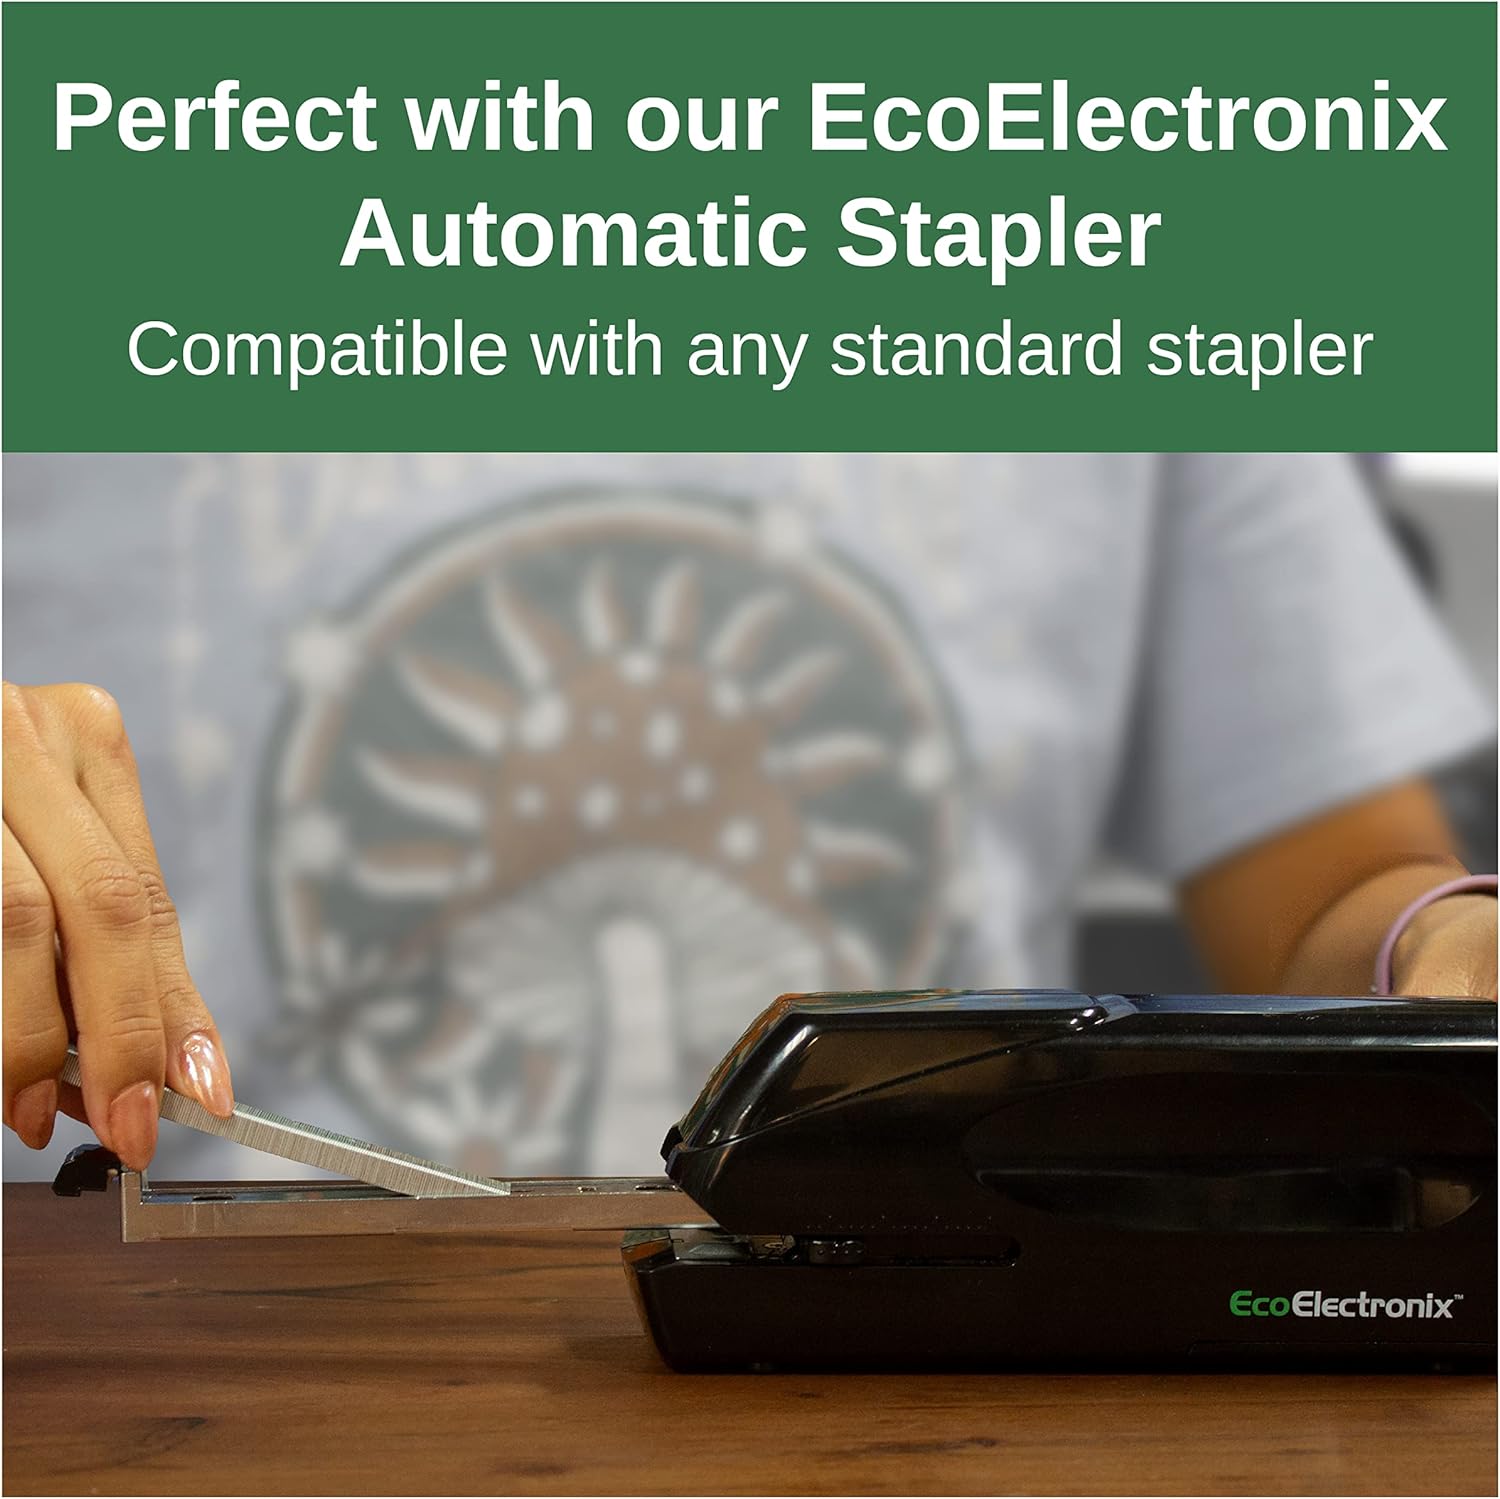 EcoElectronix Standard Staples - Jam-Free Staples Compatible with Most Desktop Staplers - 1/4 Length, 210 Staples per Strip